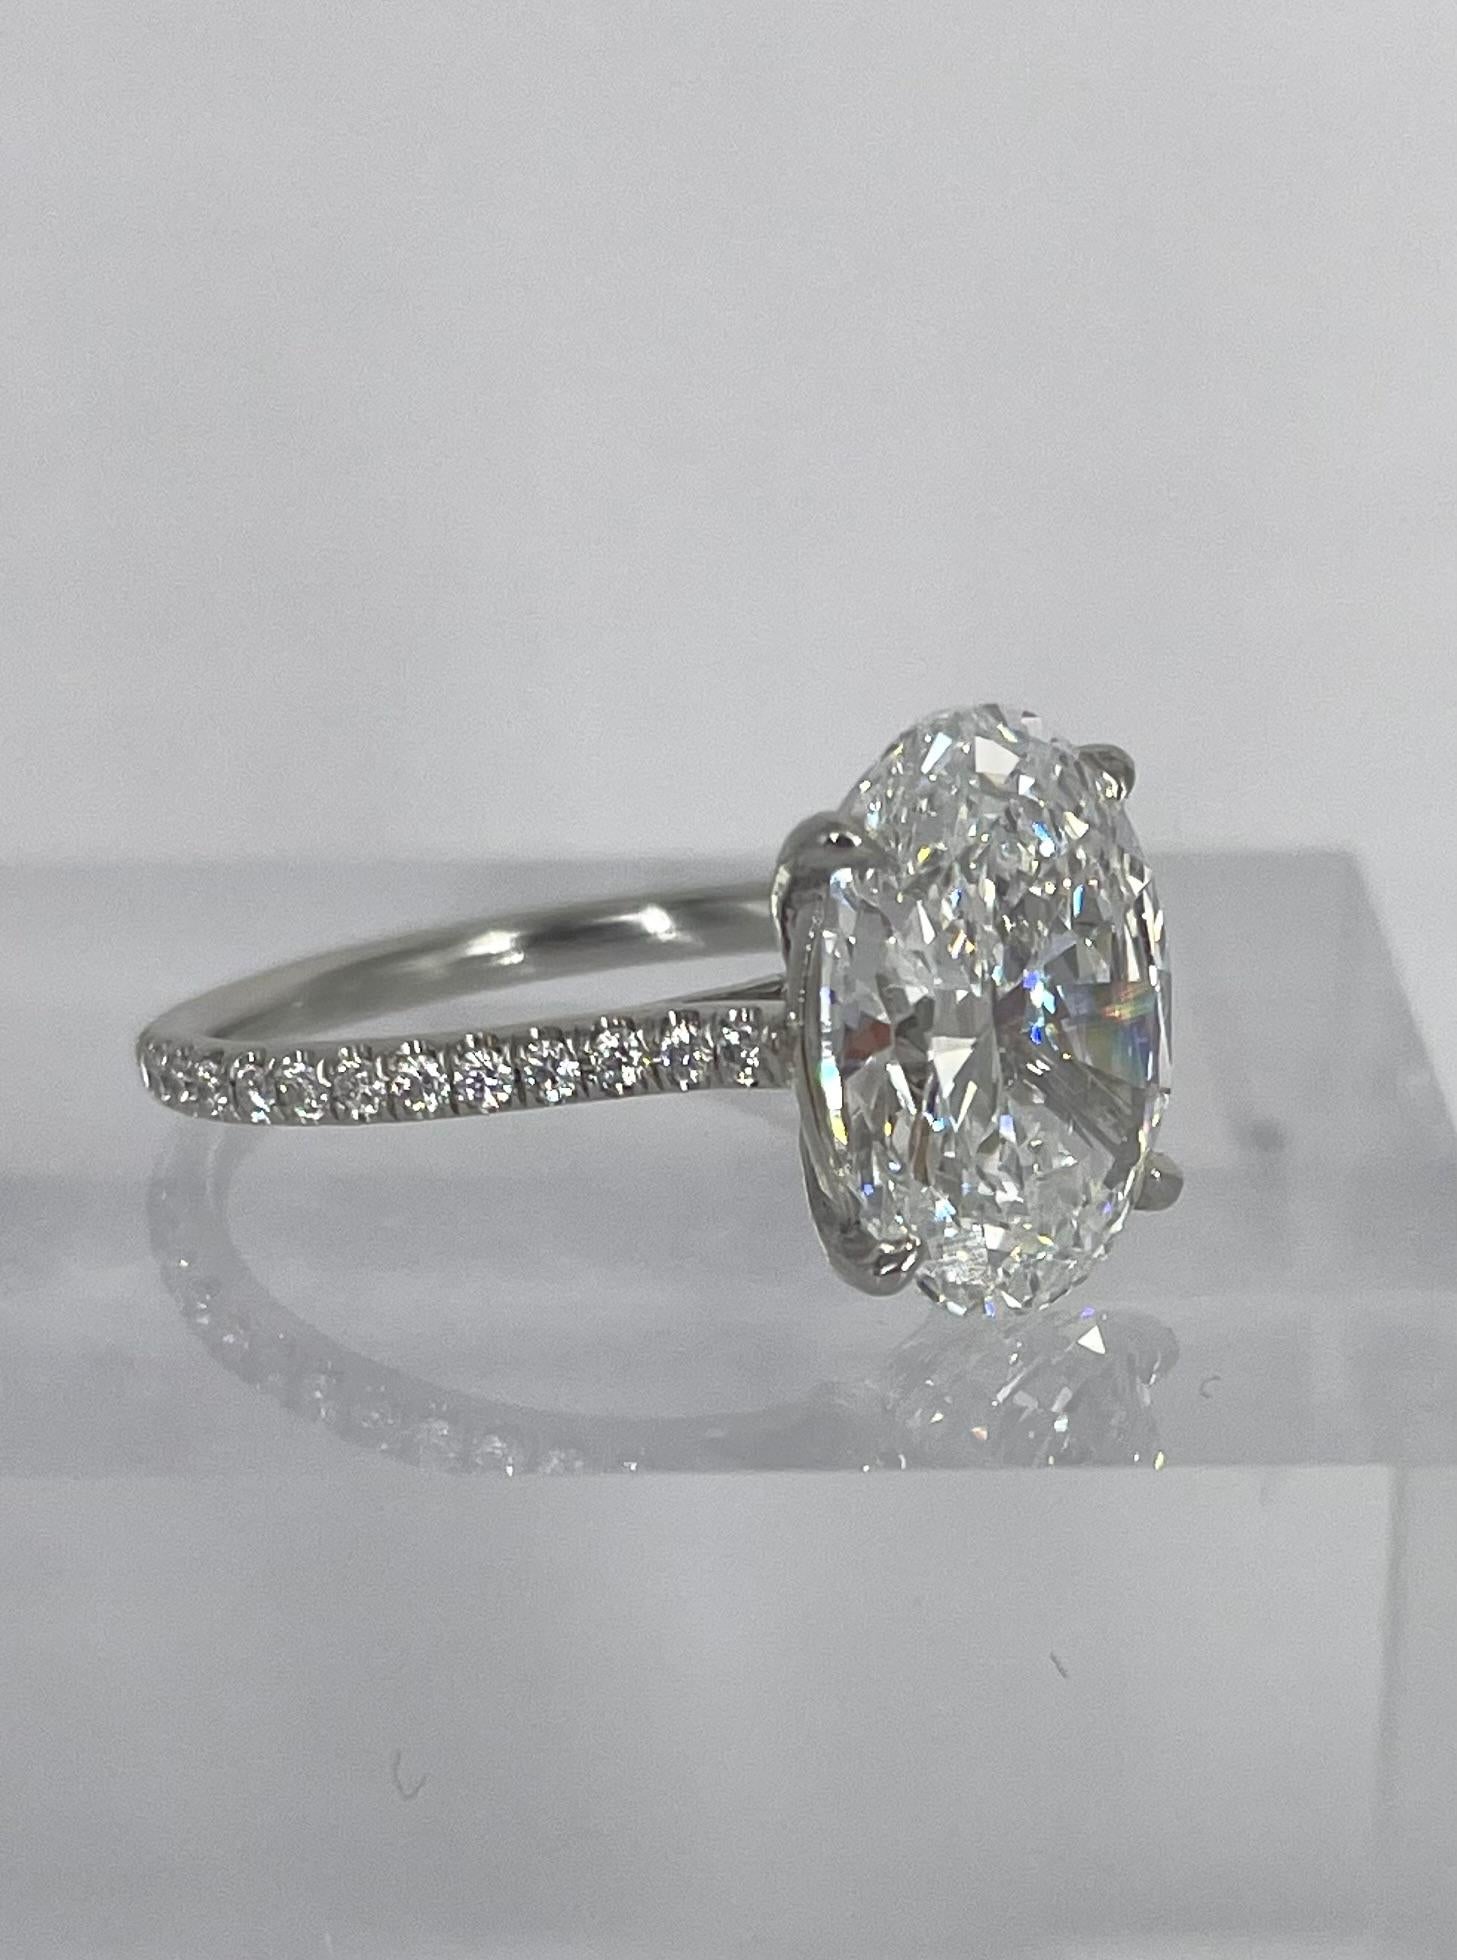 Delicate, feminine and romantic, this oval pave solitaire is perfect for someone looking for timeless sparkle. The 4.22 carat oval diamond is certified by GIA to be E color and VS1 clarity. This rare combination of high color and clarity and the